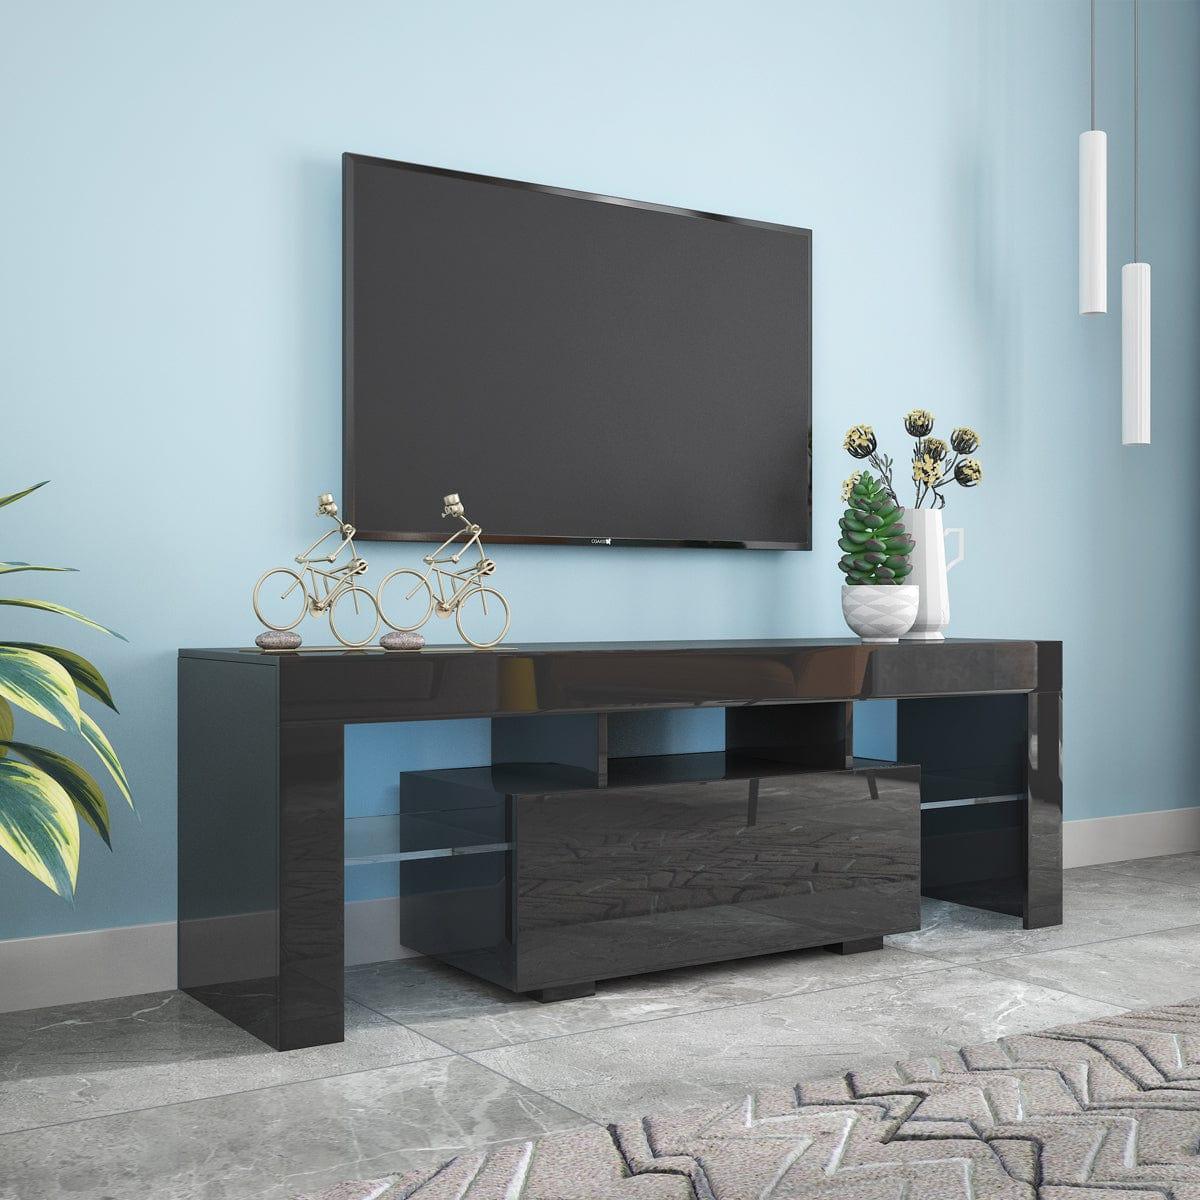 Shop Black TV Stand with LED RGB Lights,Flat Screen TV Cabinet, Gaming Consoles - in Lounge Room, Living Room and Bedroom(Black) Mademoiselle Home Decor